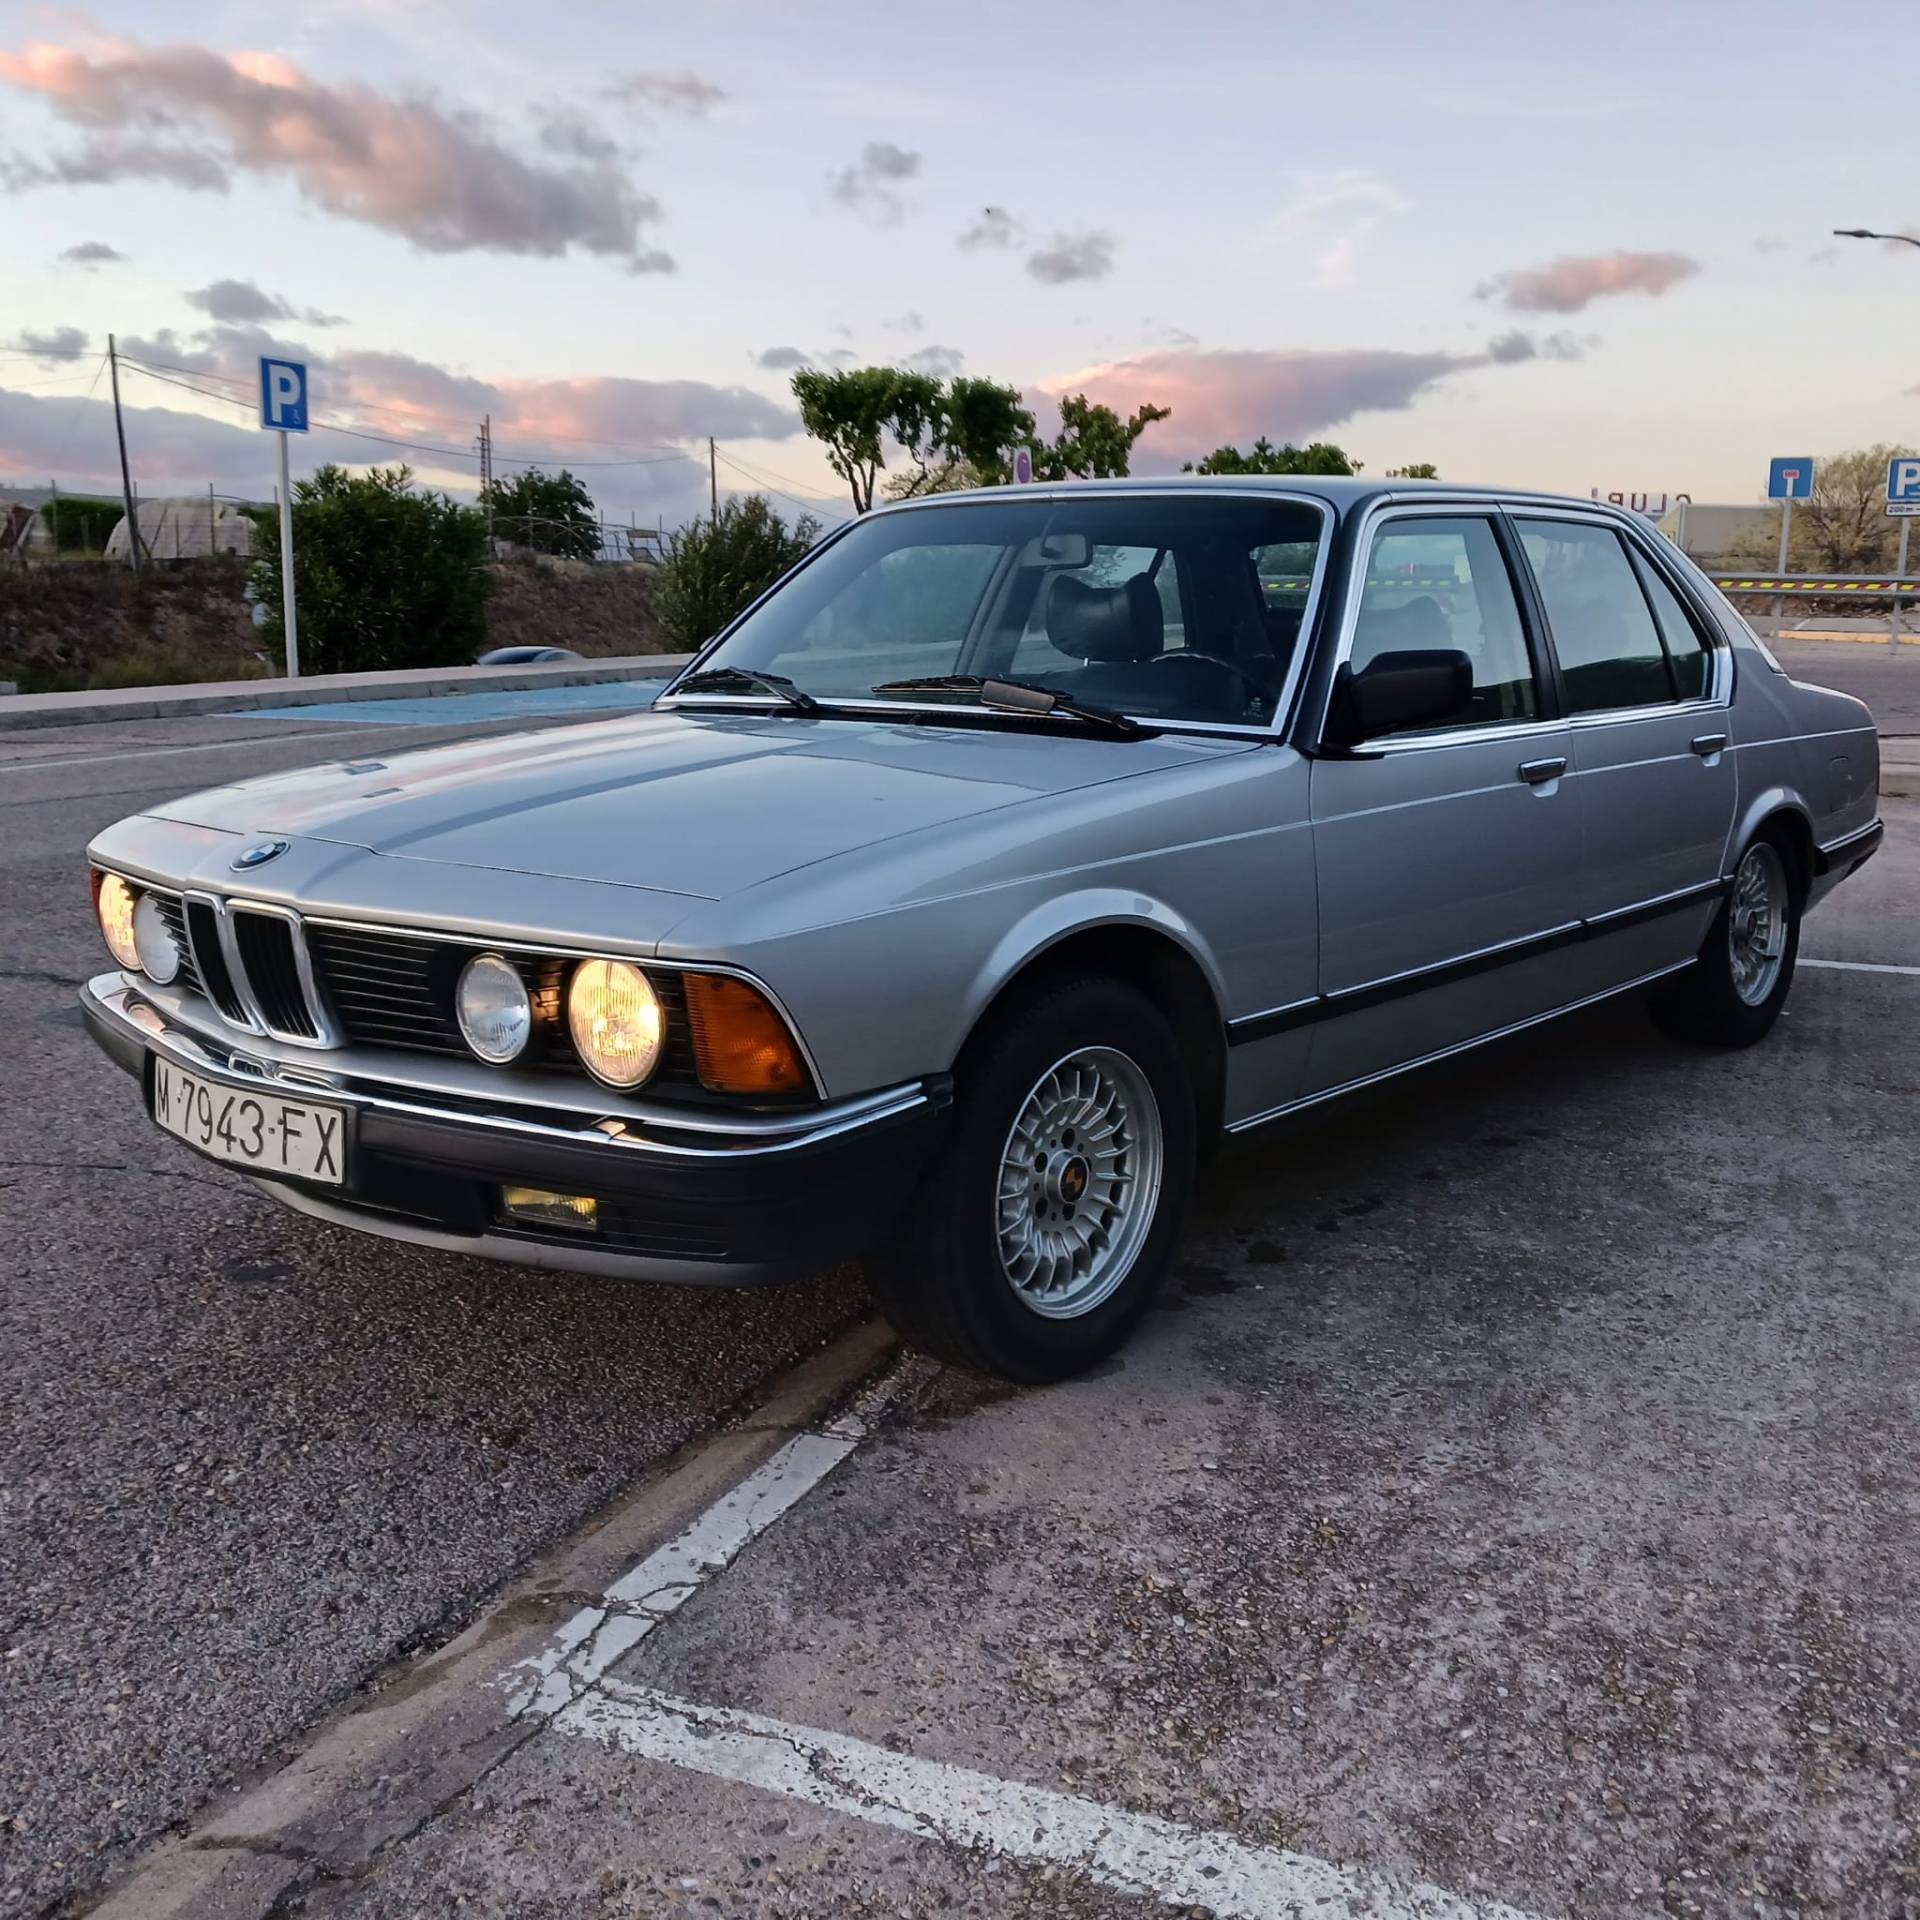 For Sale: BMW 745i (1984) offered for €18,500